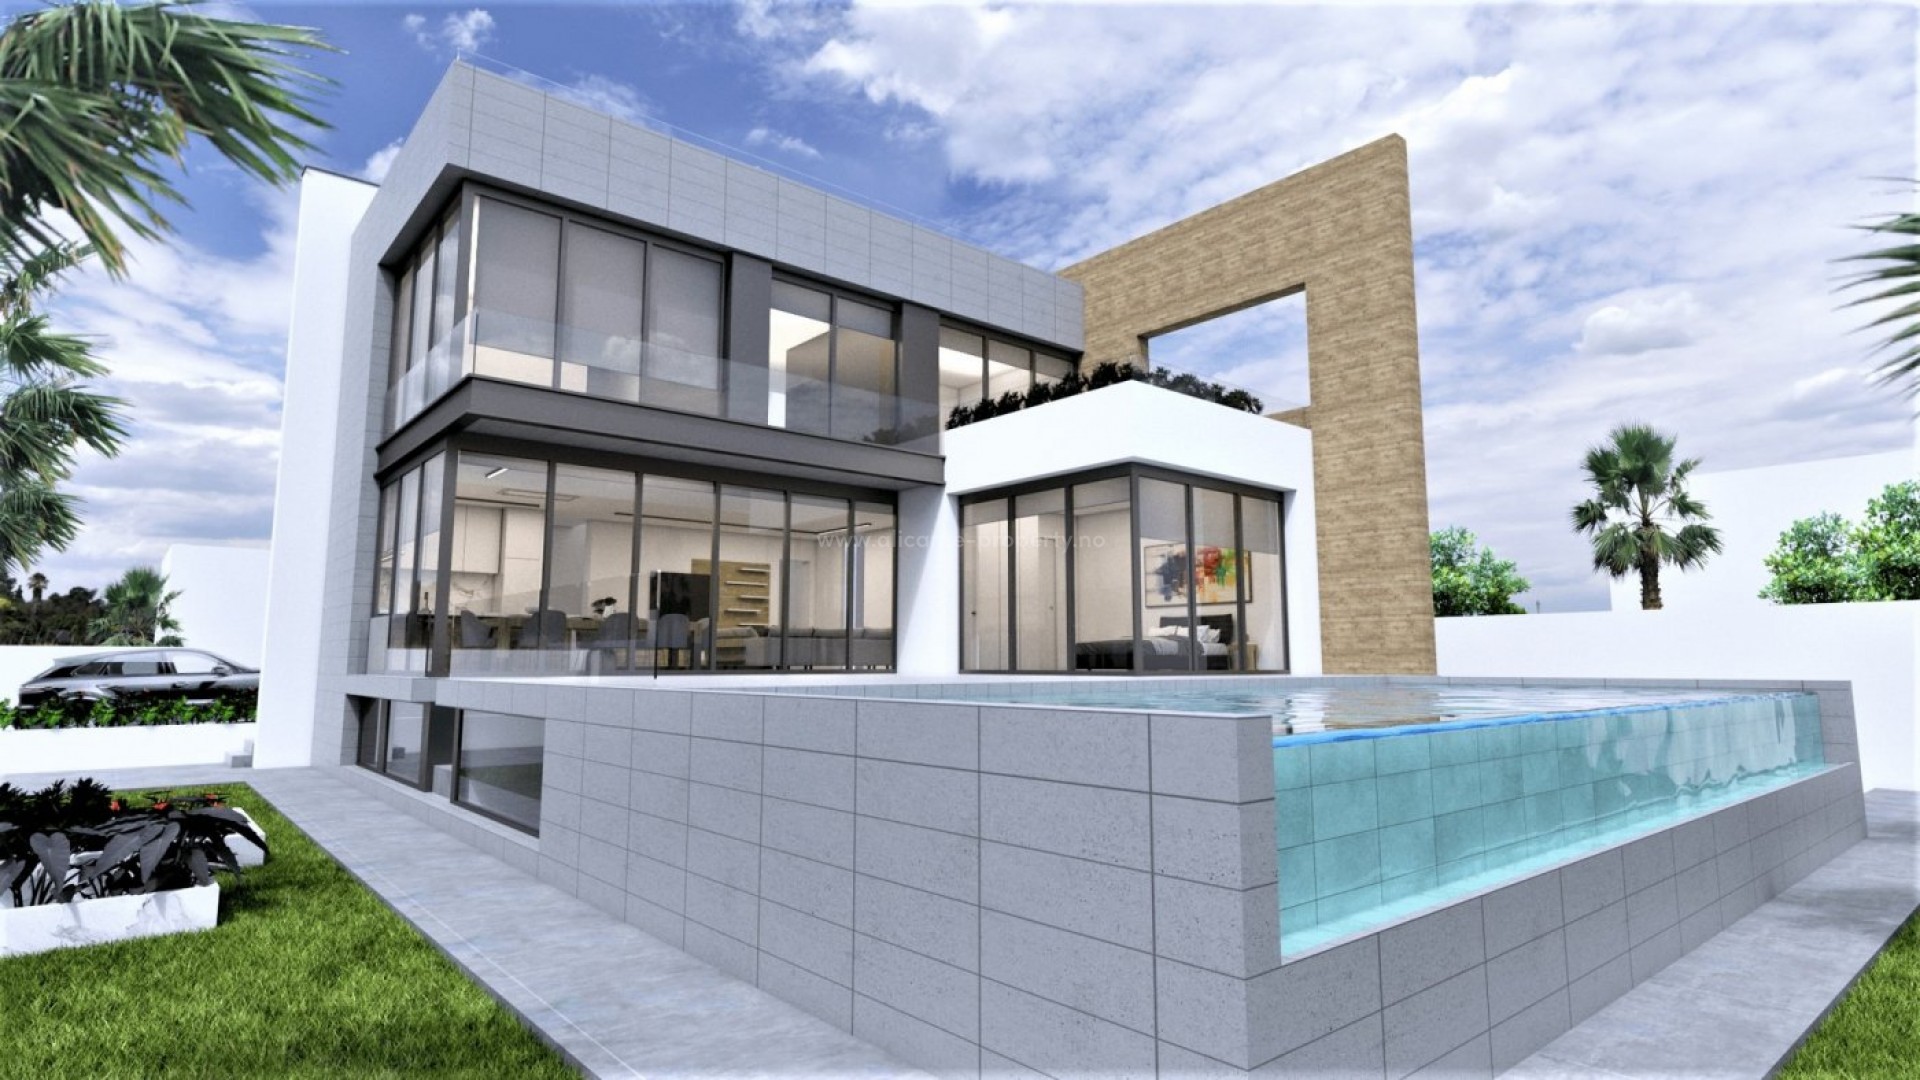 New built luxury villa near La Zenia Beach with 4 bedrooms, 6 bathrooms and sea view, 2 terraces, solarium, cellar, private pool and parking space.